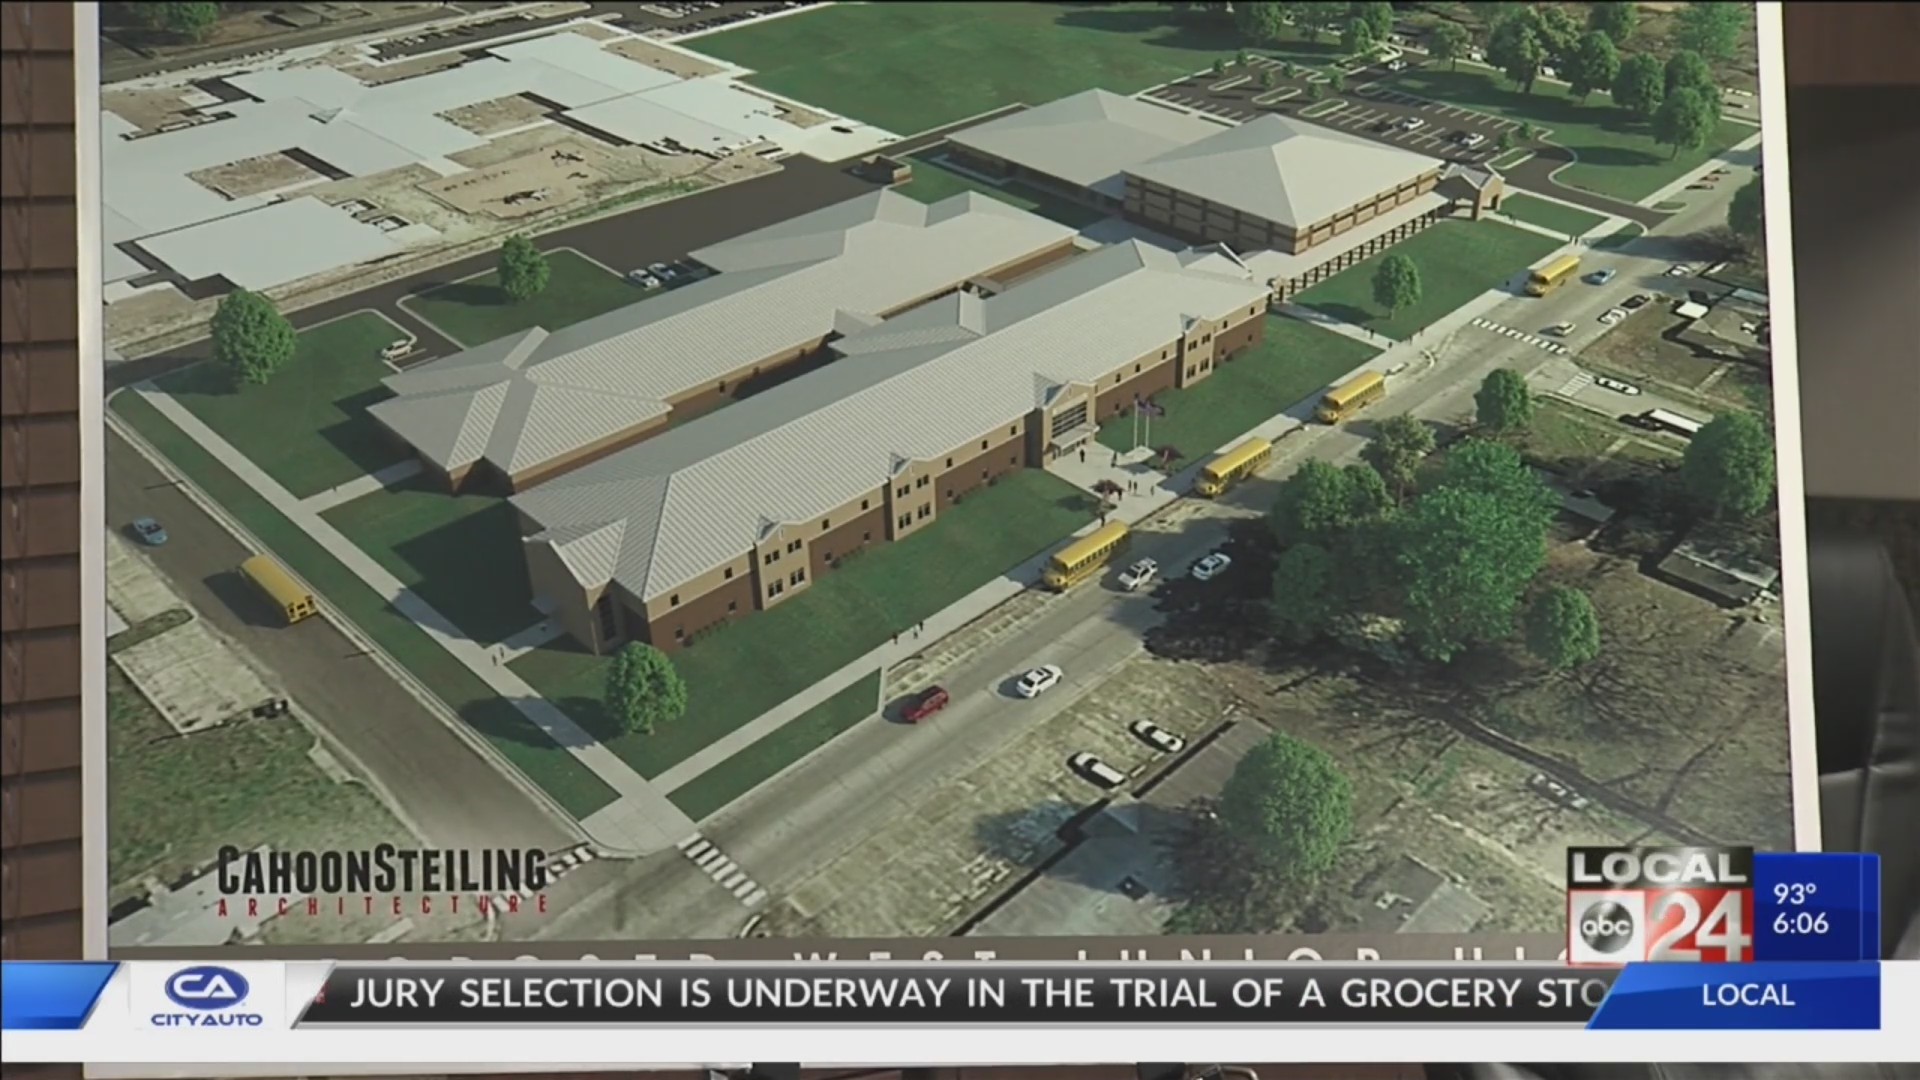 School leaders in West Memphis $22 million to build two schools, need $22 million more